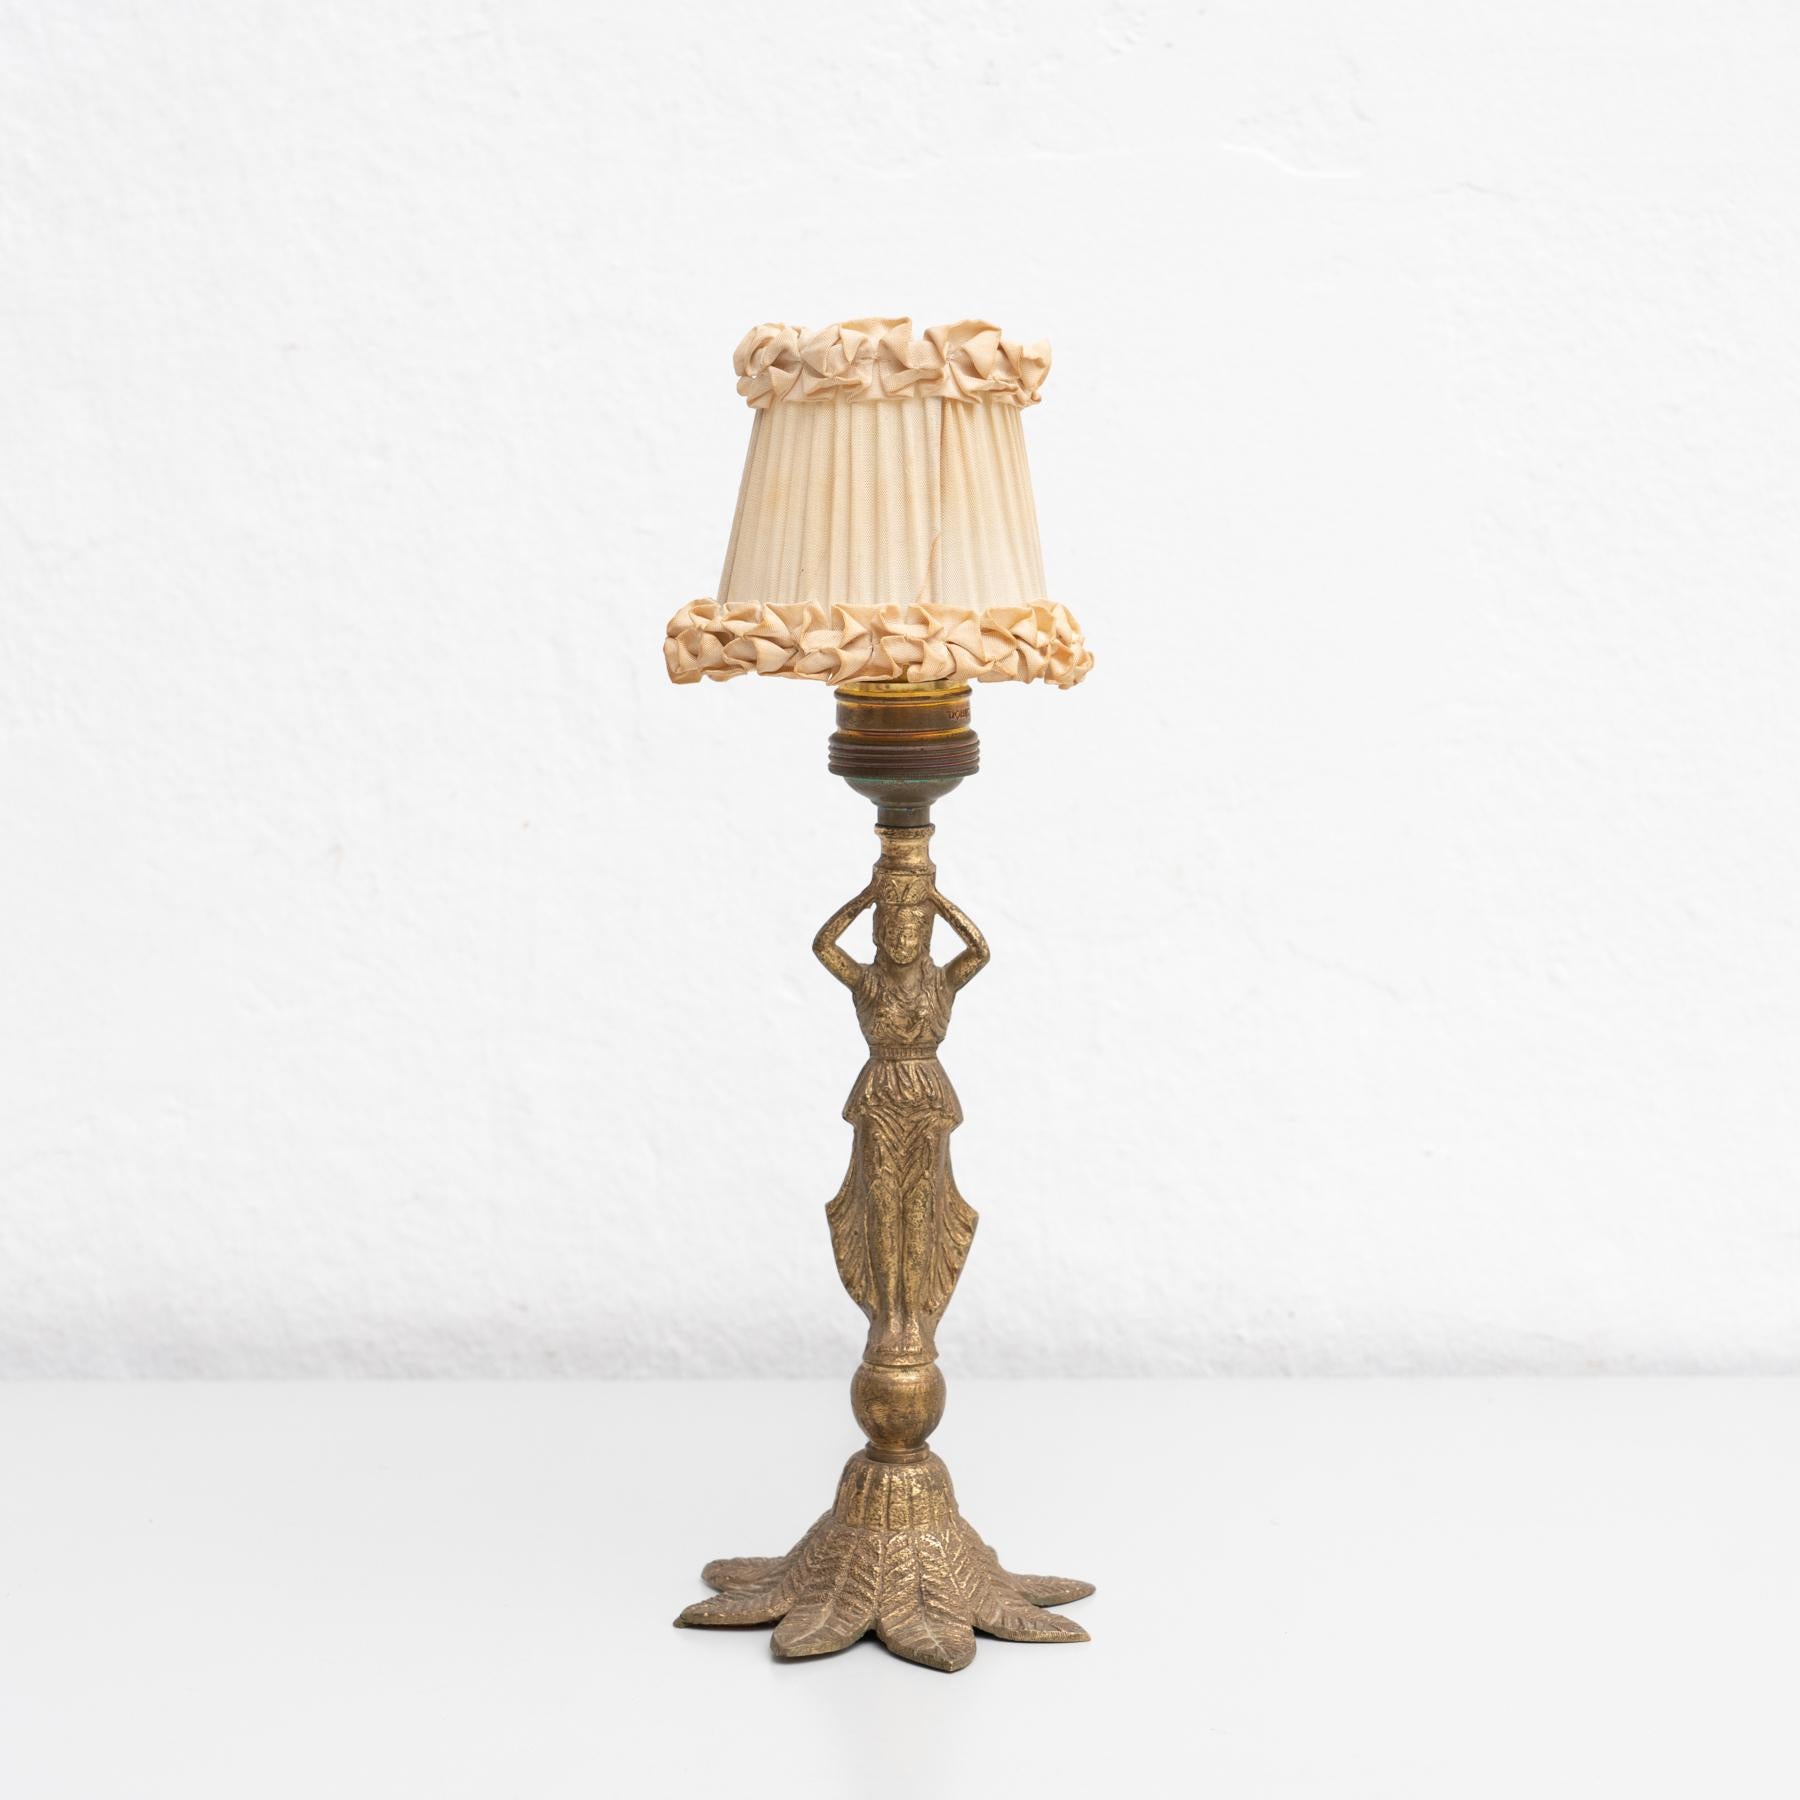 Early 20th century table lamp, with a beautiful decoration of a woman and a screen.

Manufactured by unknown designer in Spain.

In original condition, with minor wear consistent with age and use, preserving a beautiful